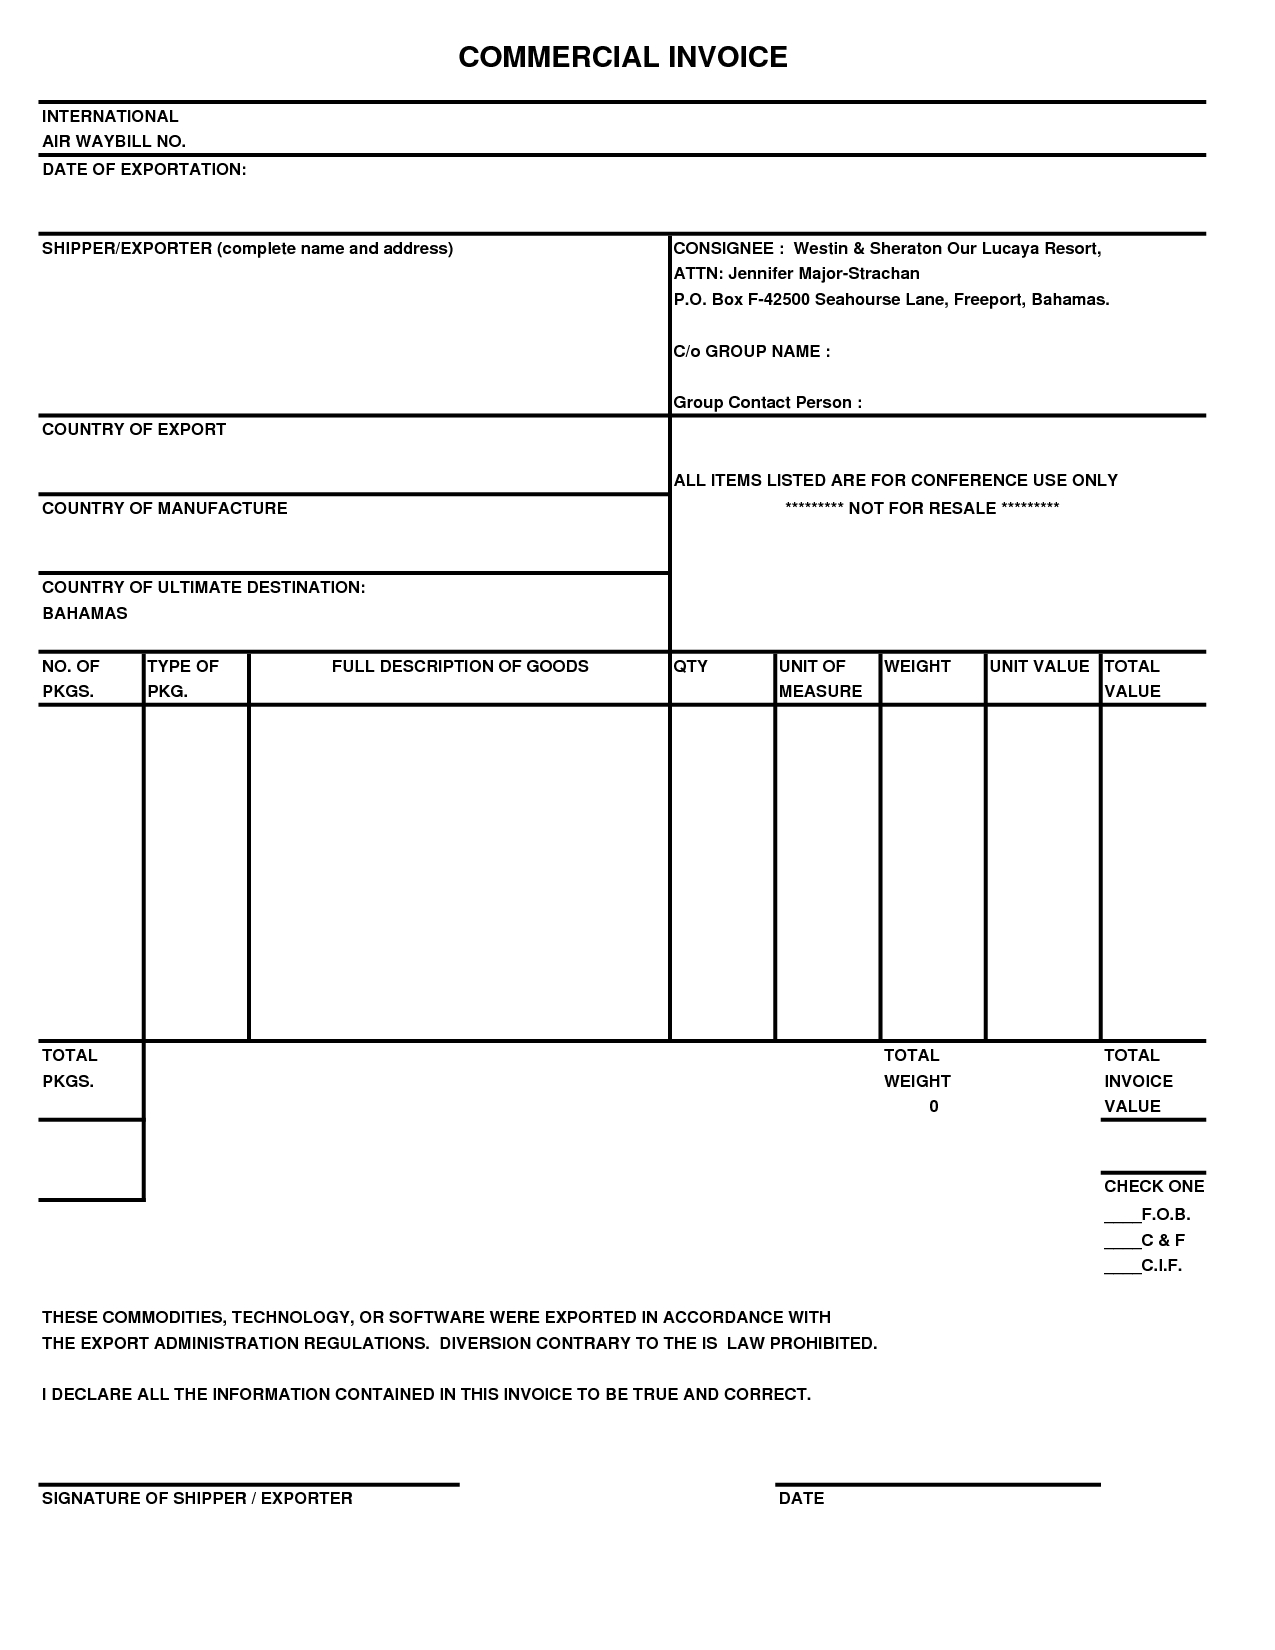 fedex commercial invoice pdf best business template blank commercial invoice form